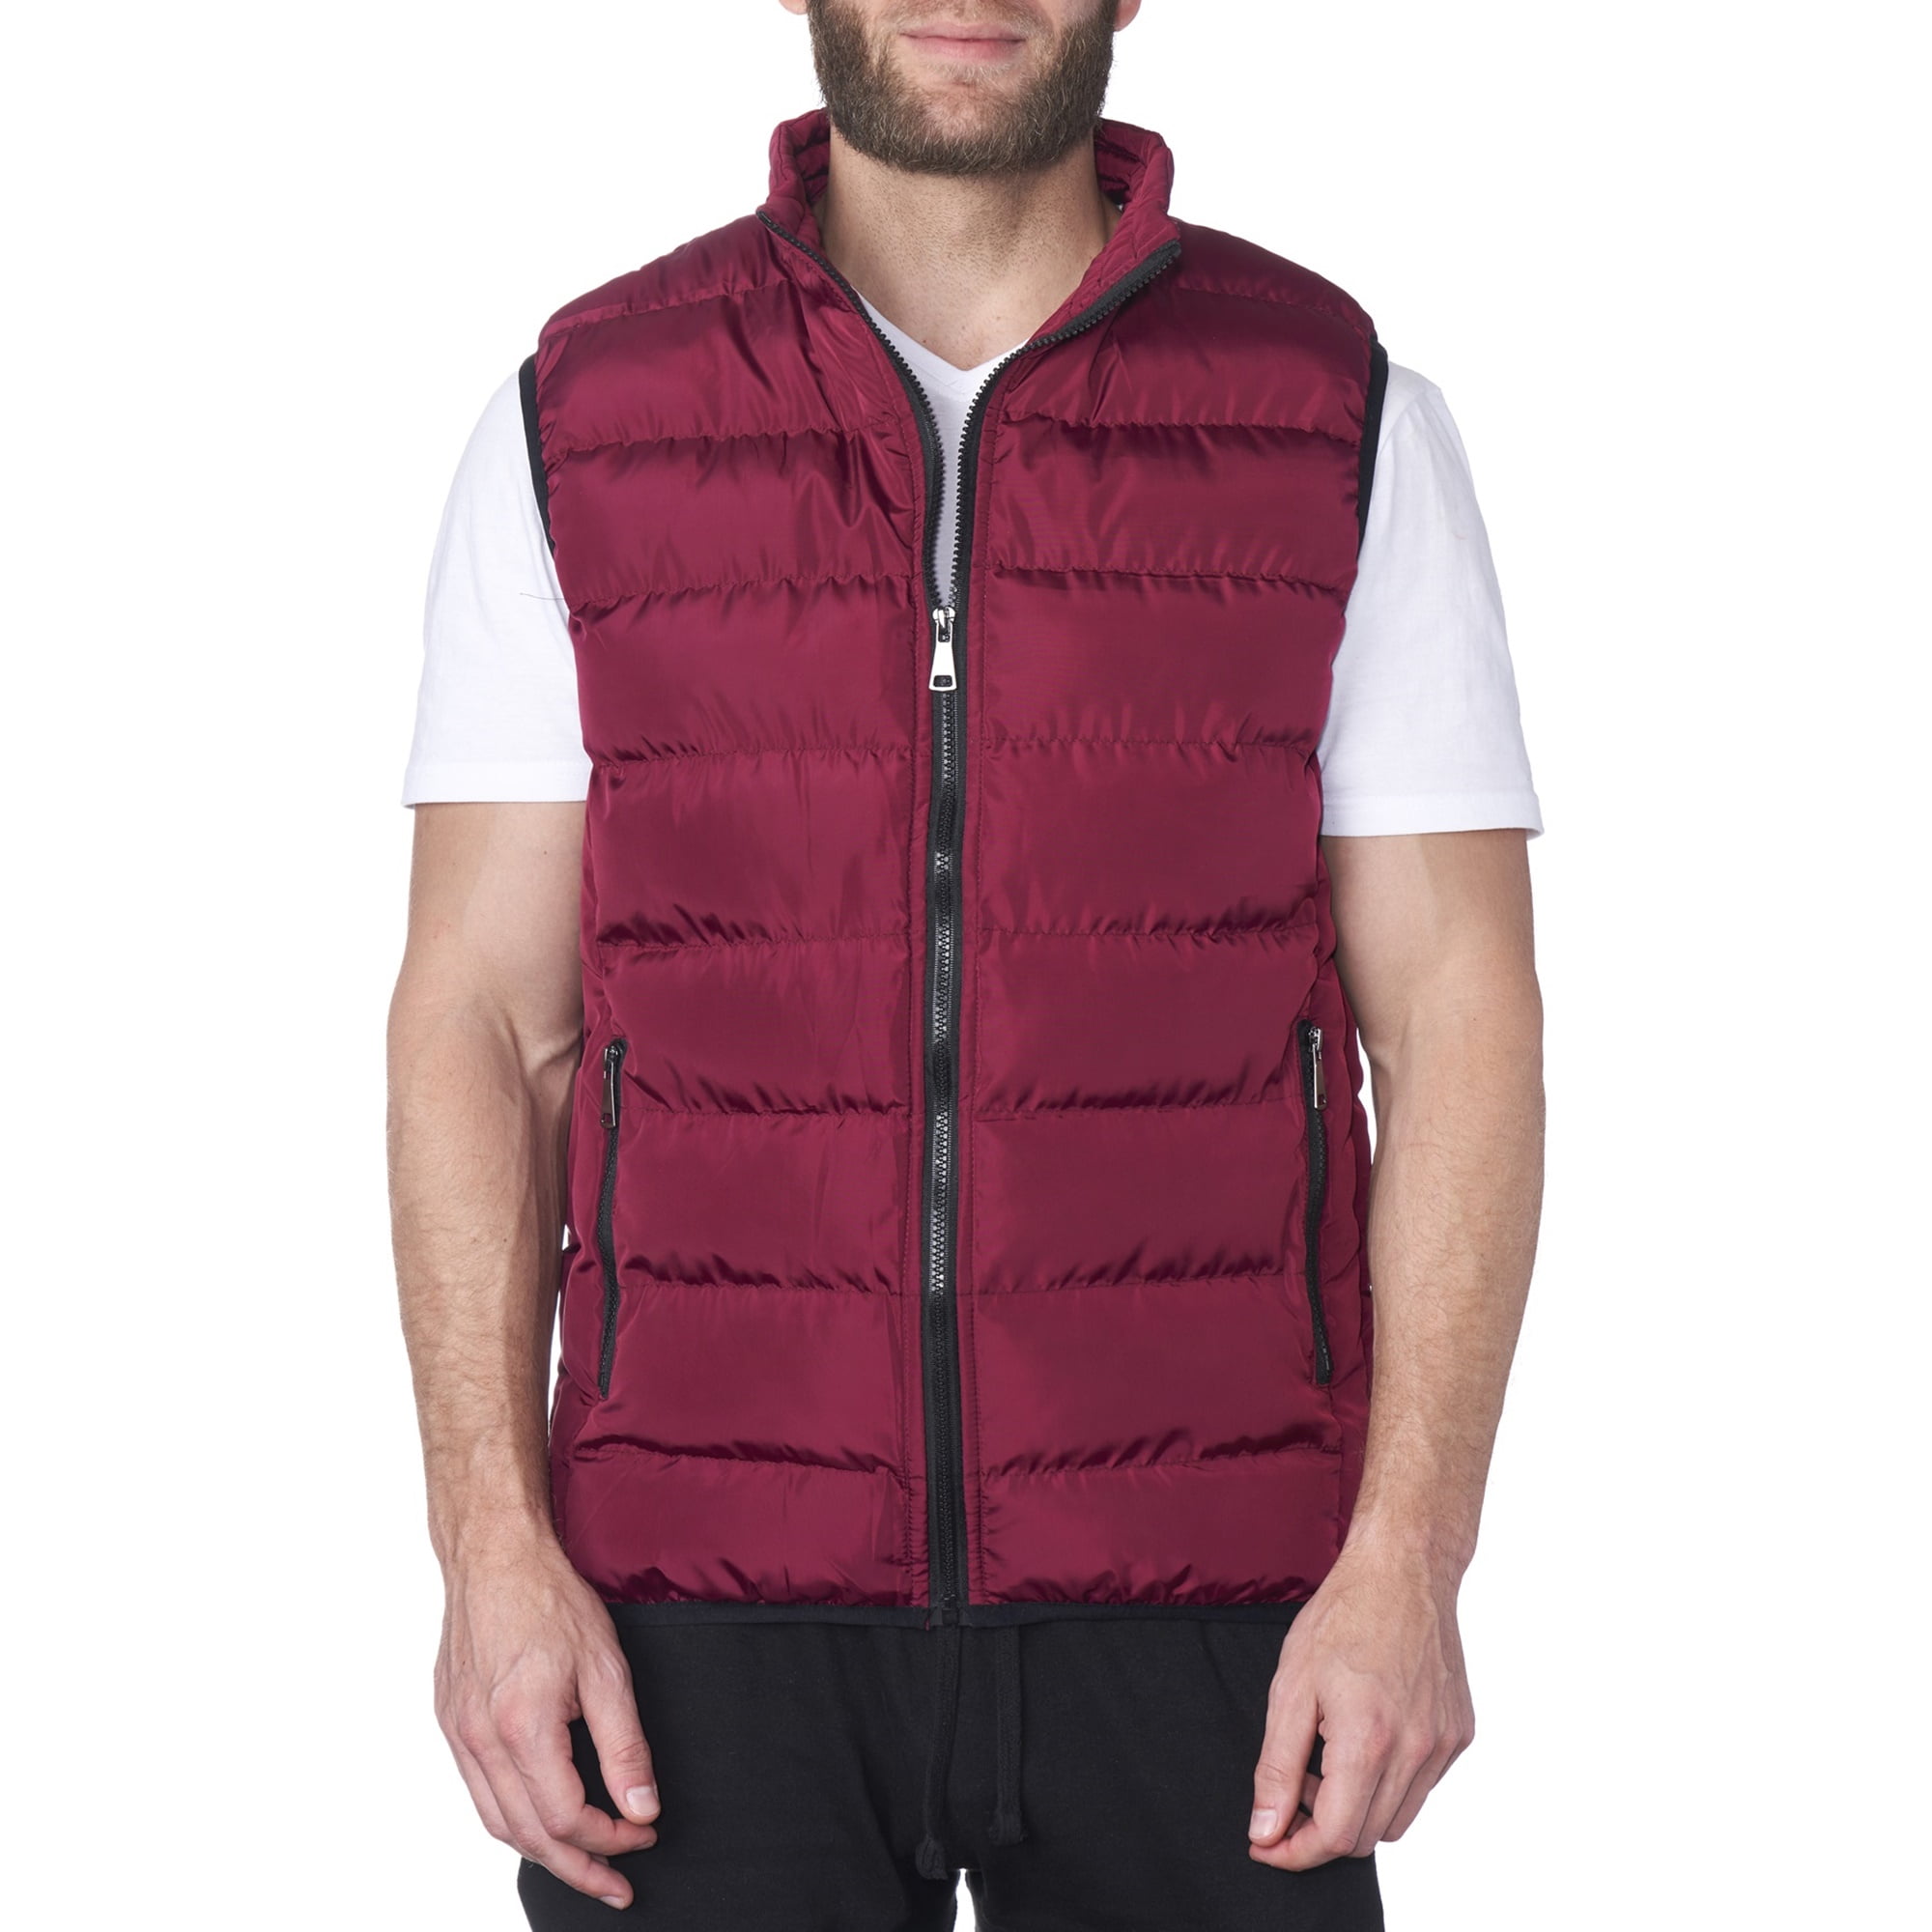 Sayhi Mens Warm Winter Padded Quilted Puffer Vest Stand Collar Down Vest